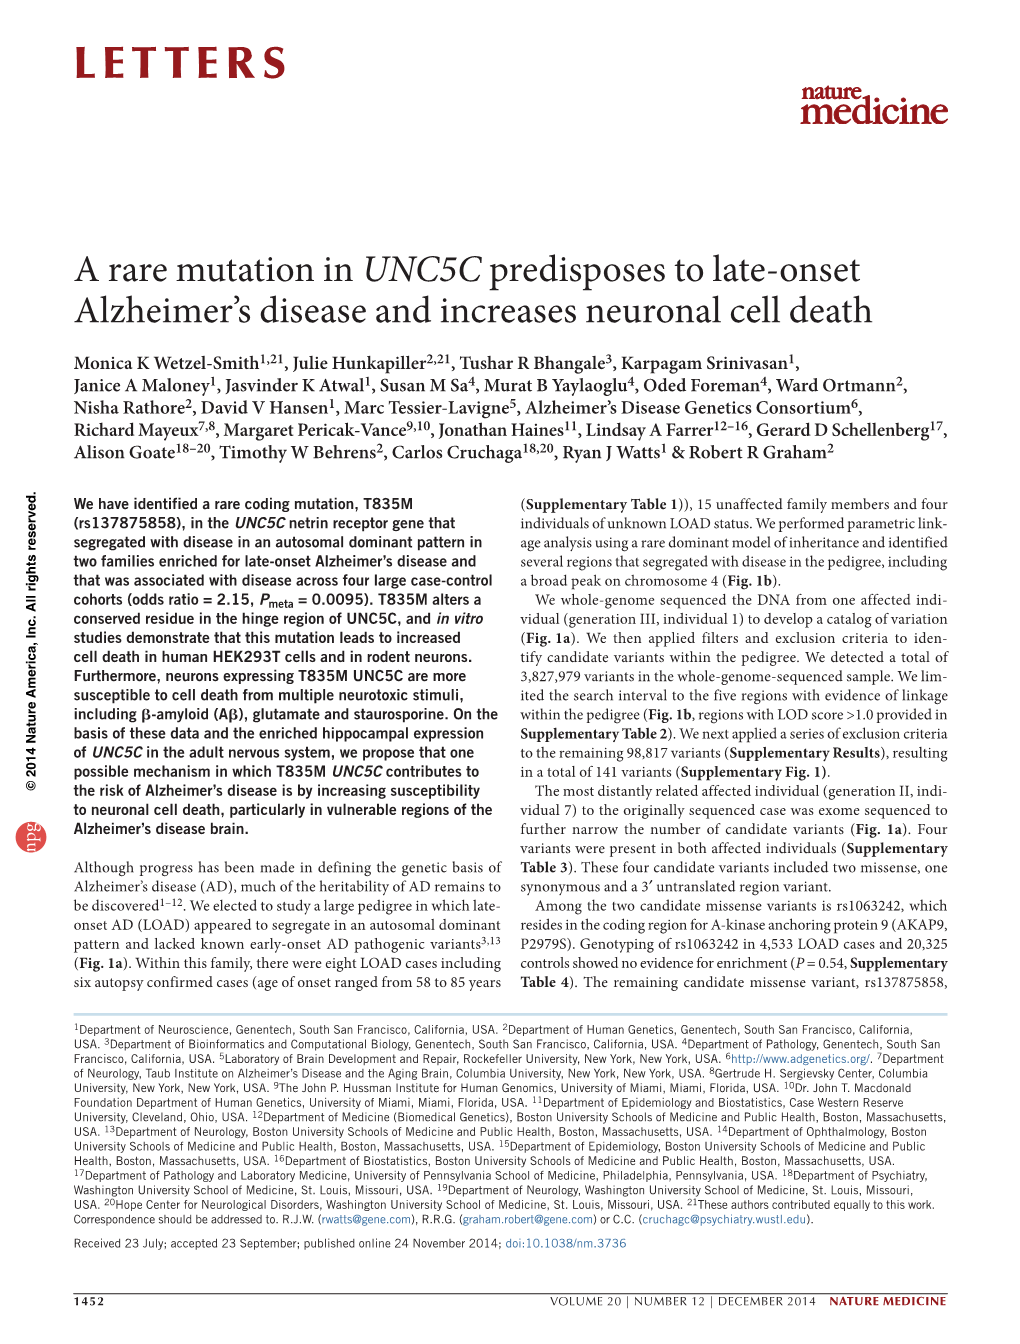 UNC5C Predisposes to Late-Onset Alzheimer’S Disease and Increases Neuronal Cell Death